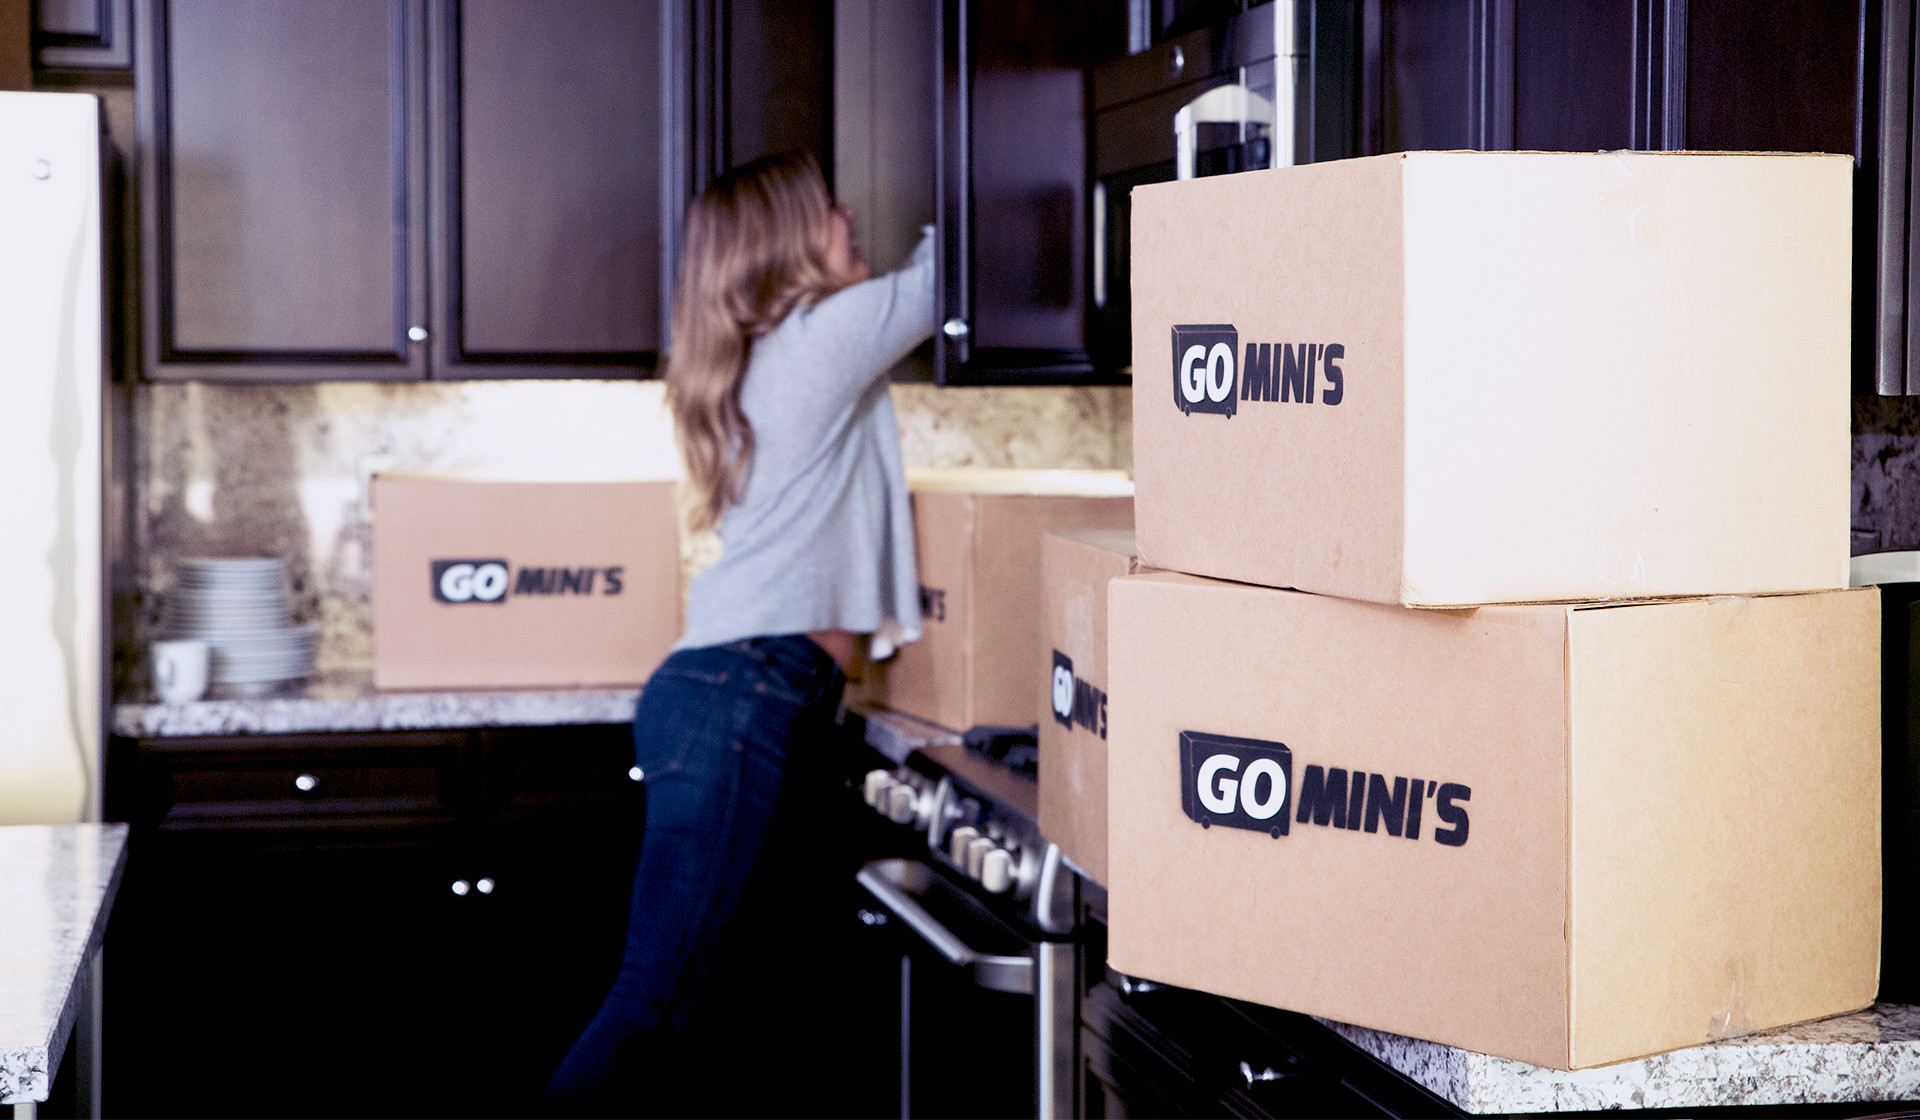 A woman reaches into a kitchen cupboard while cardboard Go Mini's moving boxes are on the counter